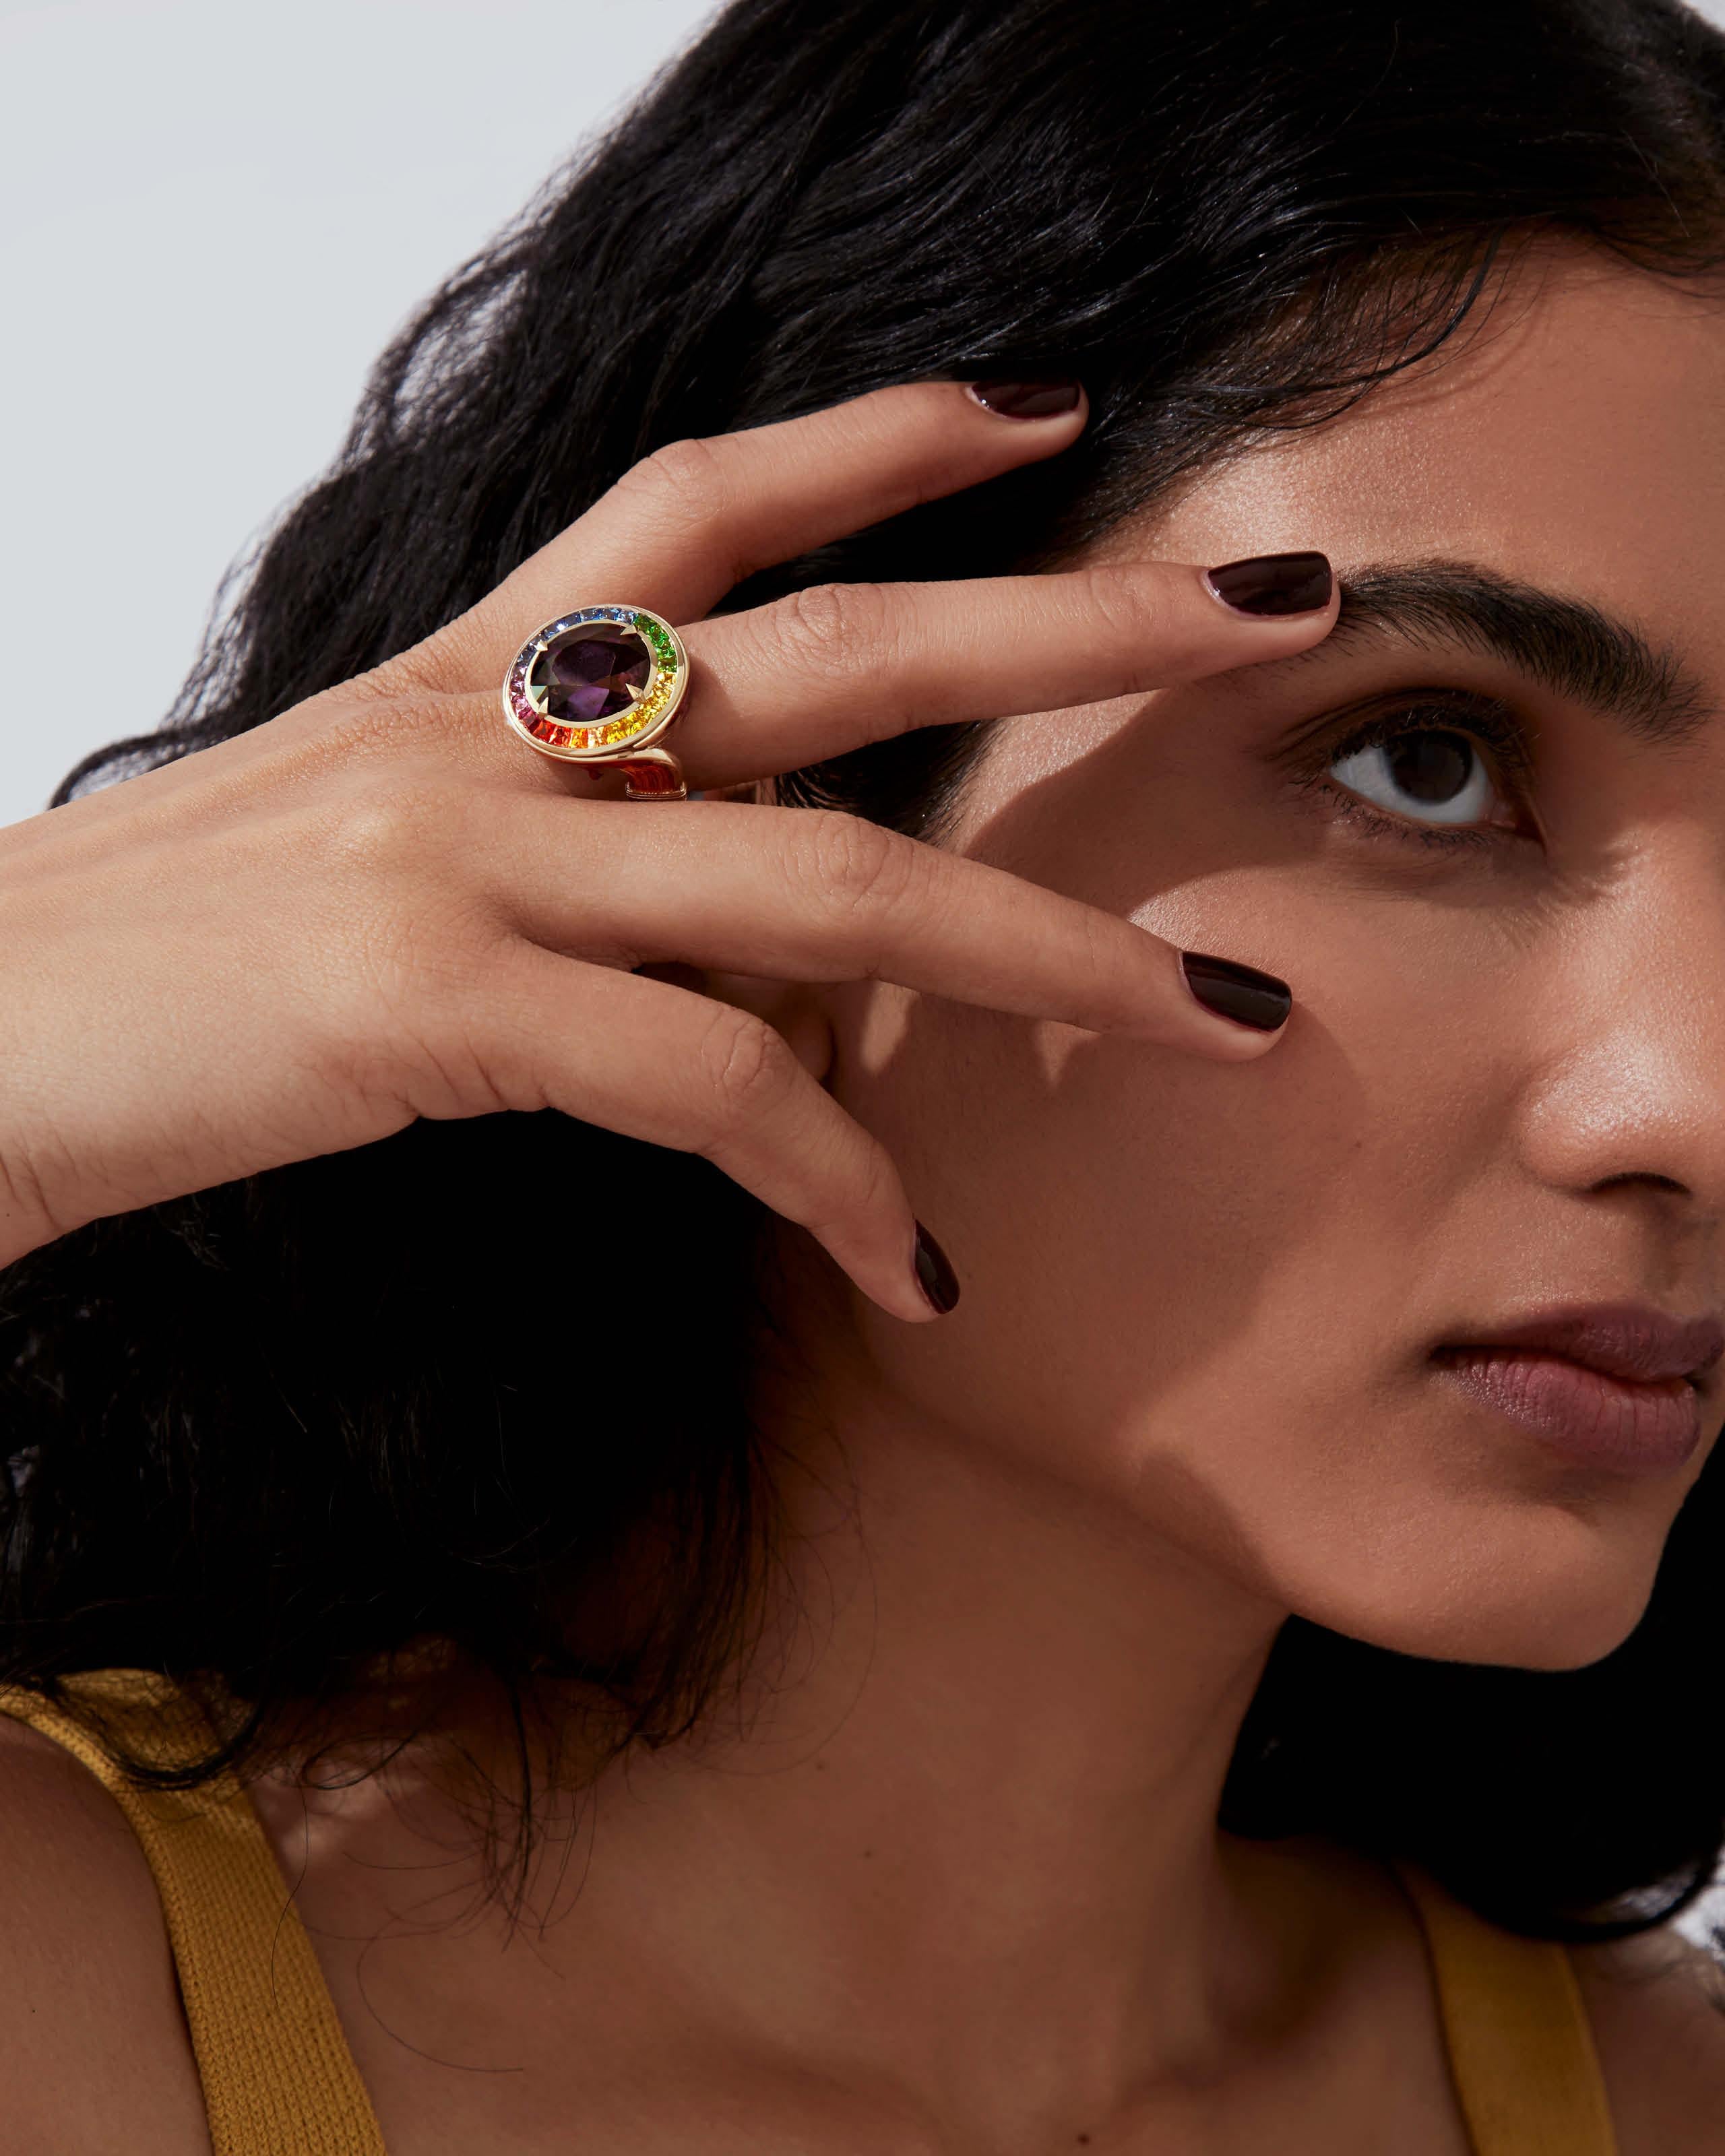 ‘The ReBelles’, takes inspiration from heroines throughout history, celebrating their achievements, intellects, and courage. Comprising of seven limited-edition made-to order cocktail rings, each piece showcases Stephen Webster’s impeccable